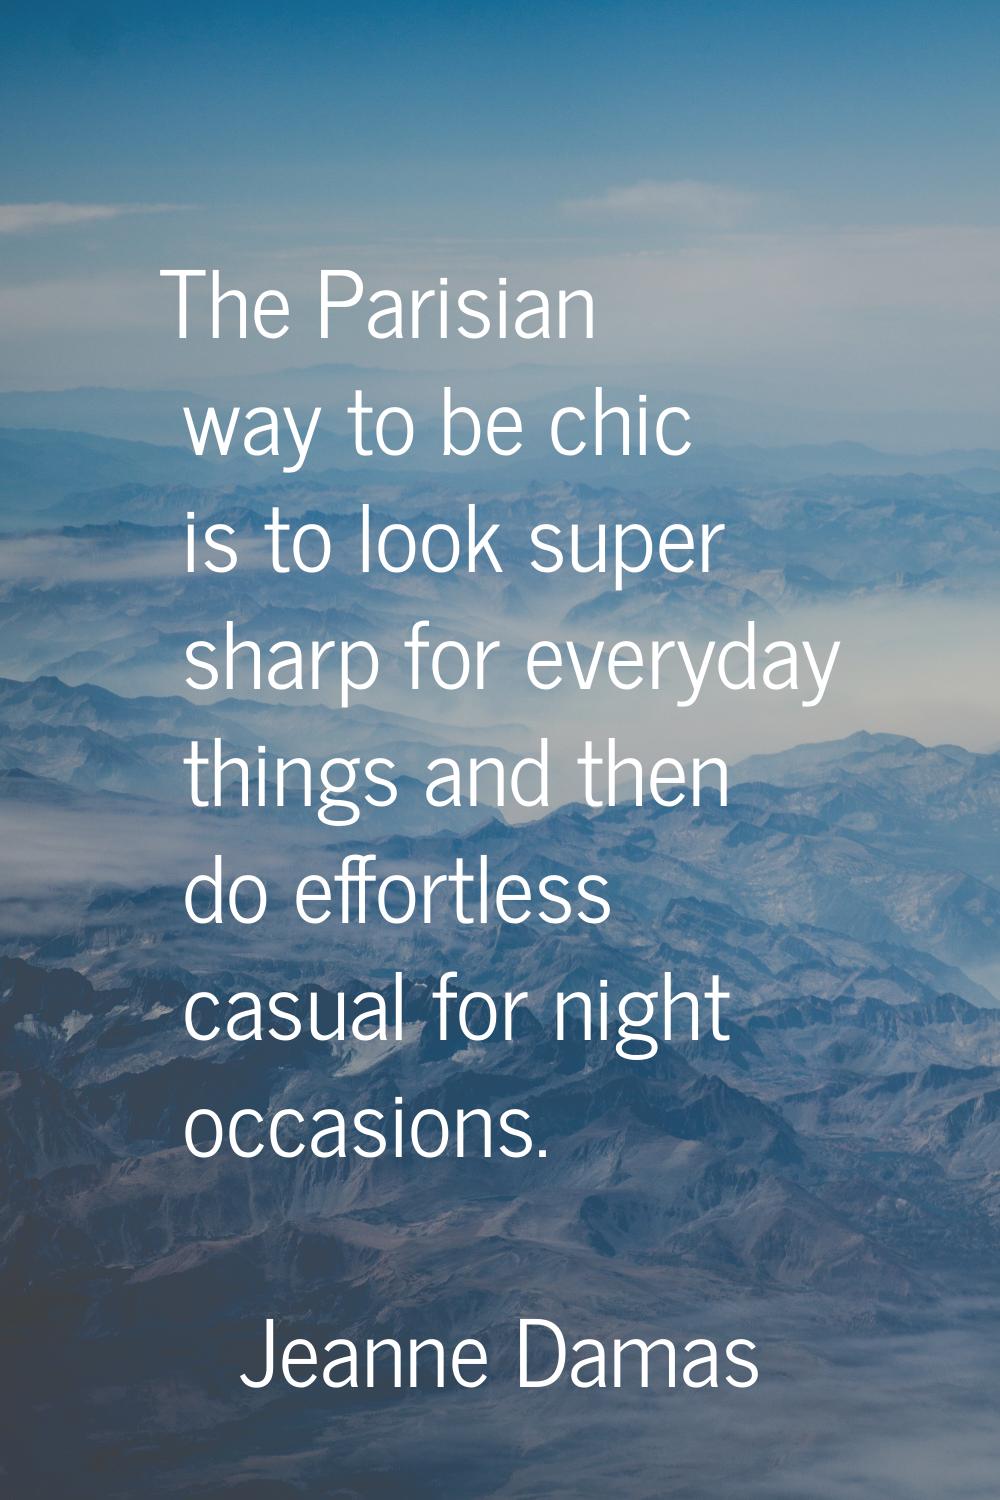 The Parisian way to be chic is to look super sharp for everyday things and then do effortless casua